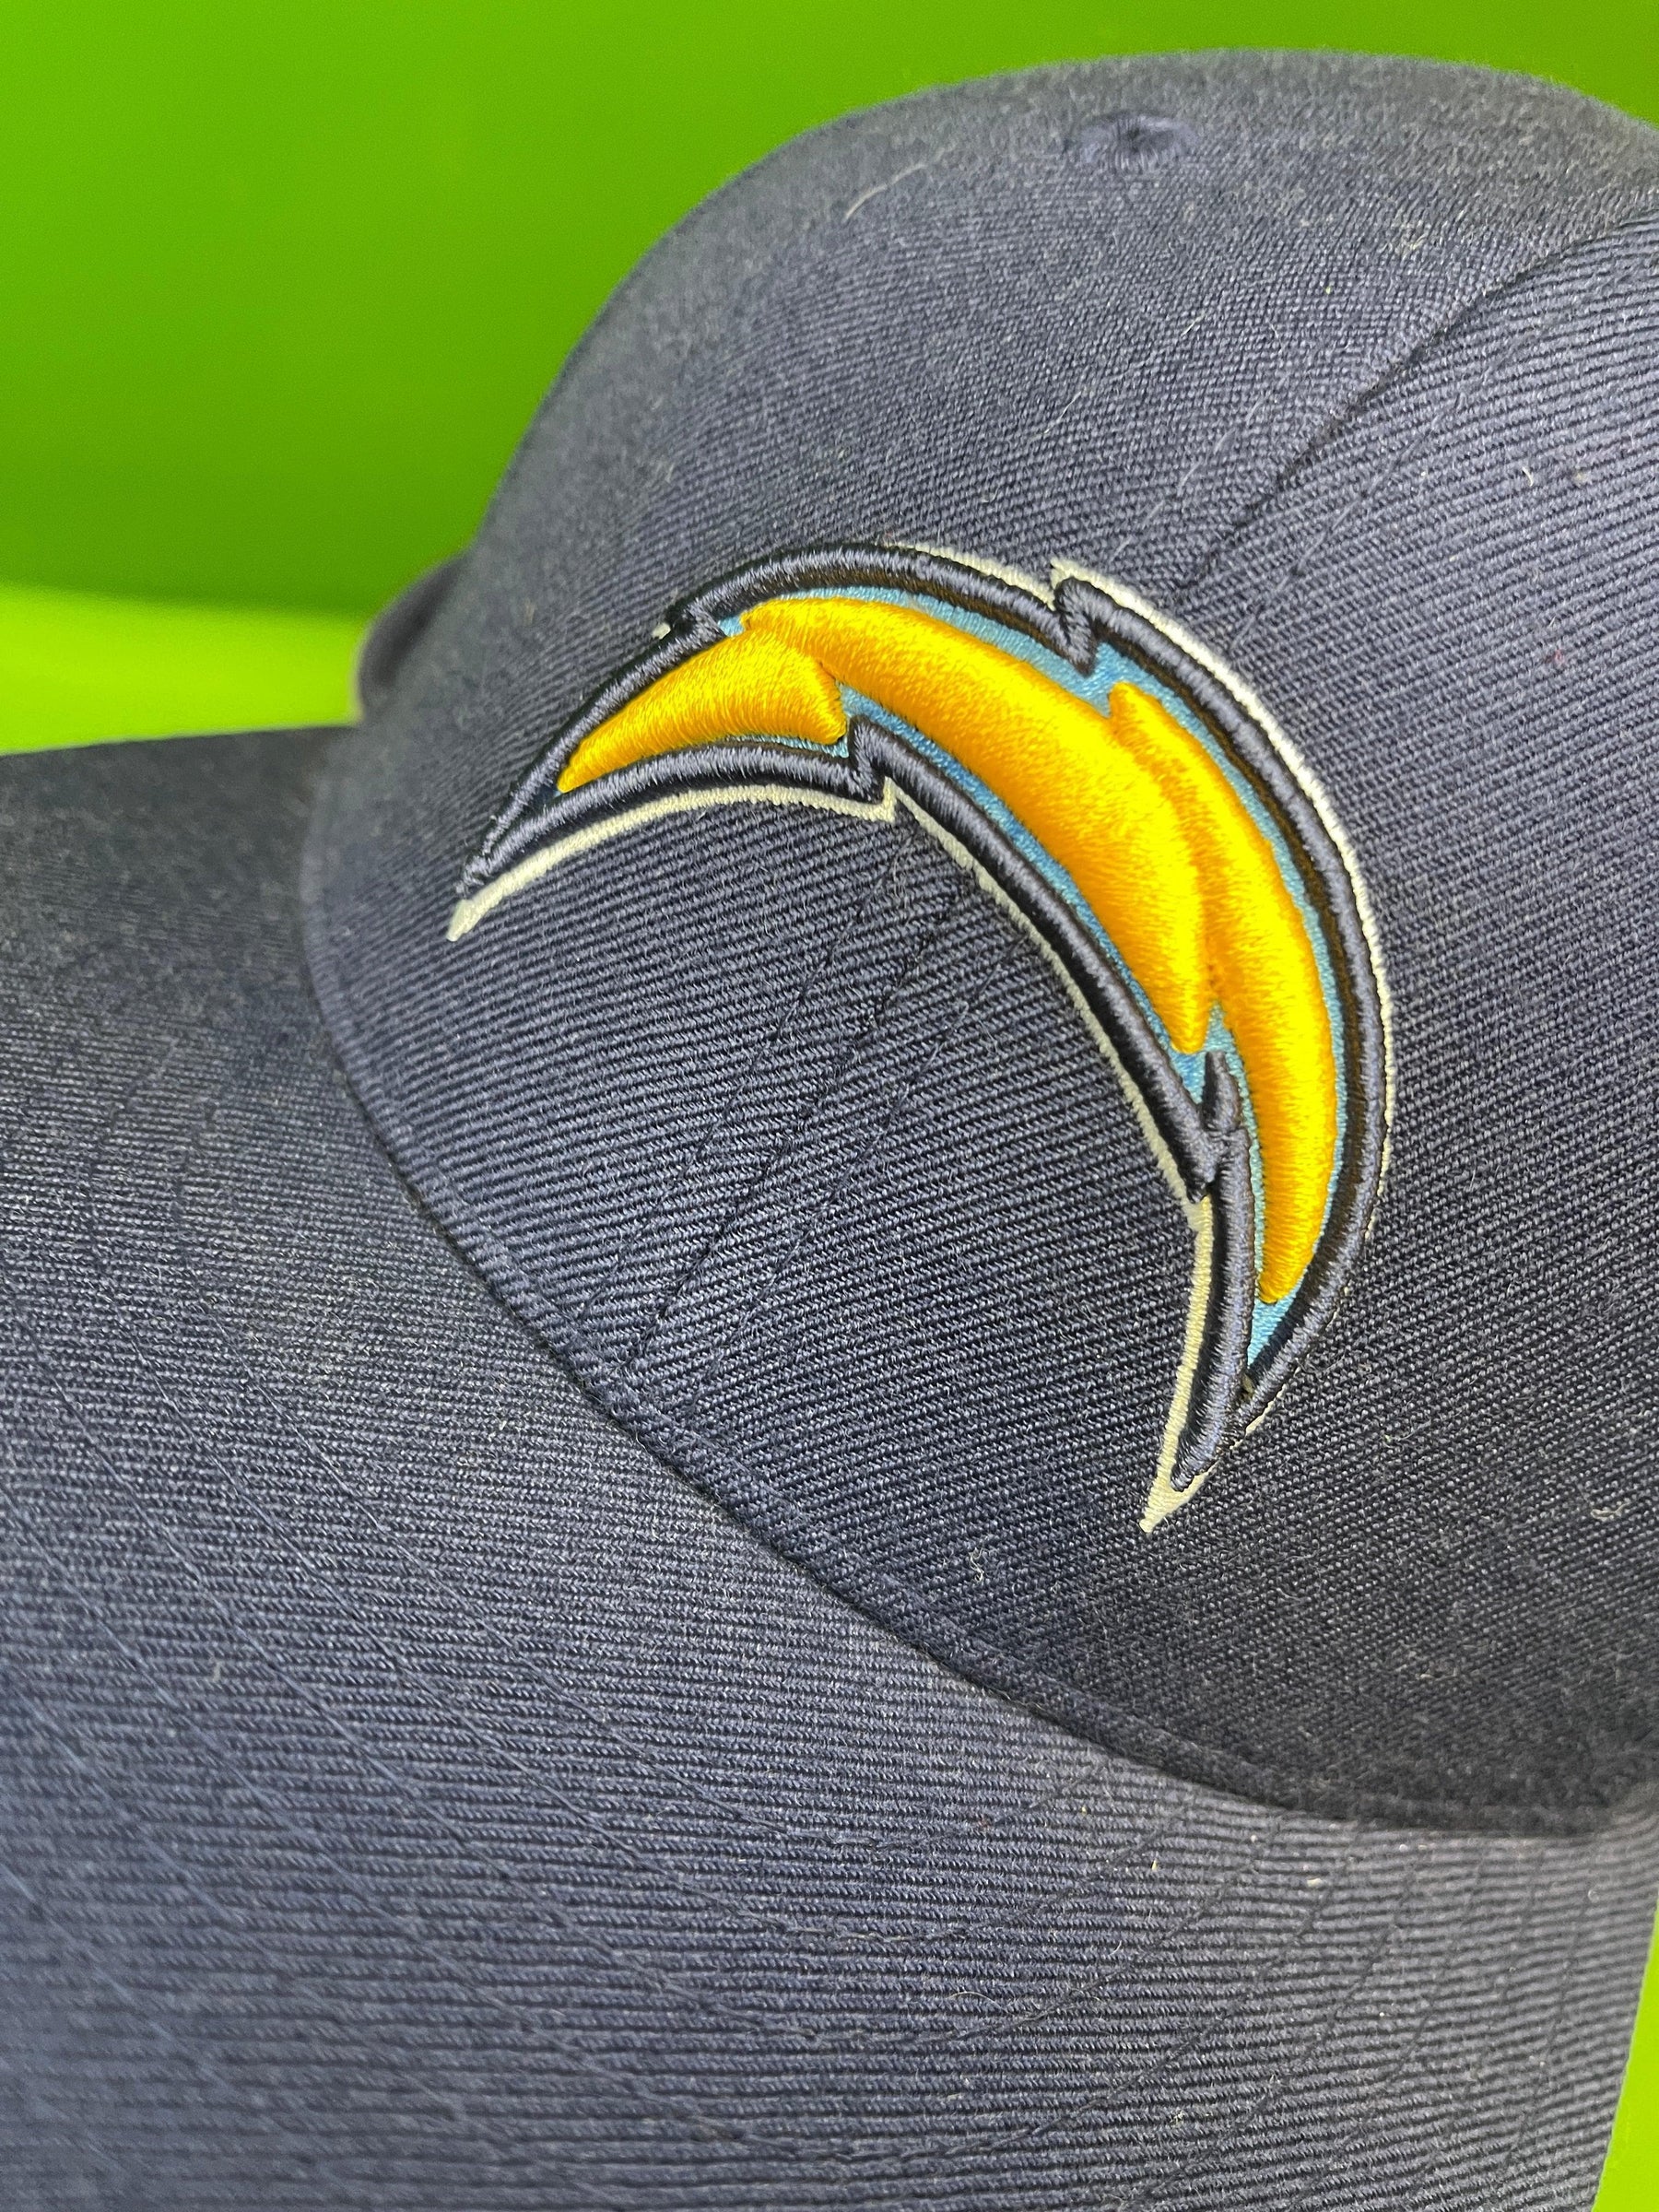 NFL Los Angeles Chargers Reebok Winter Flannel-Lined Cap/Hat Large/X-Large 7-5/8